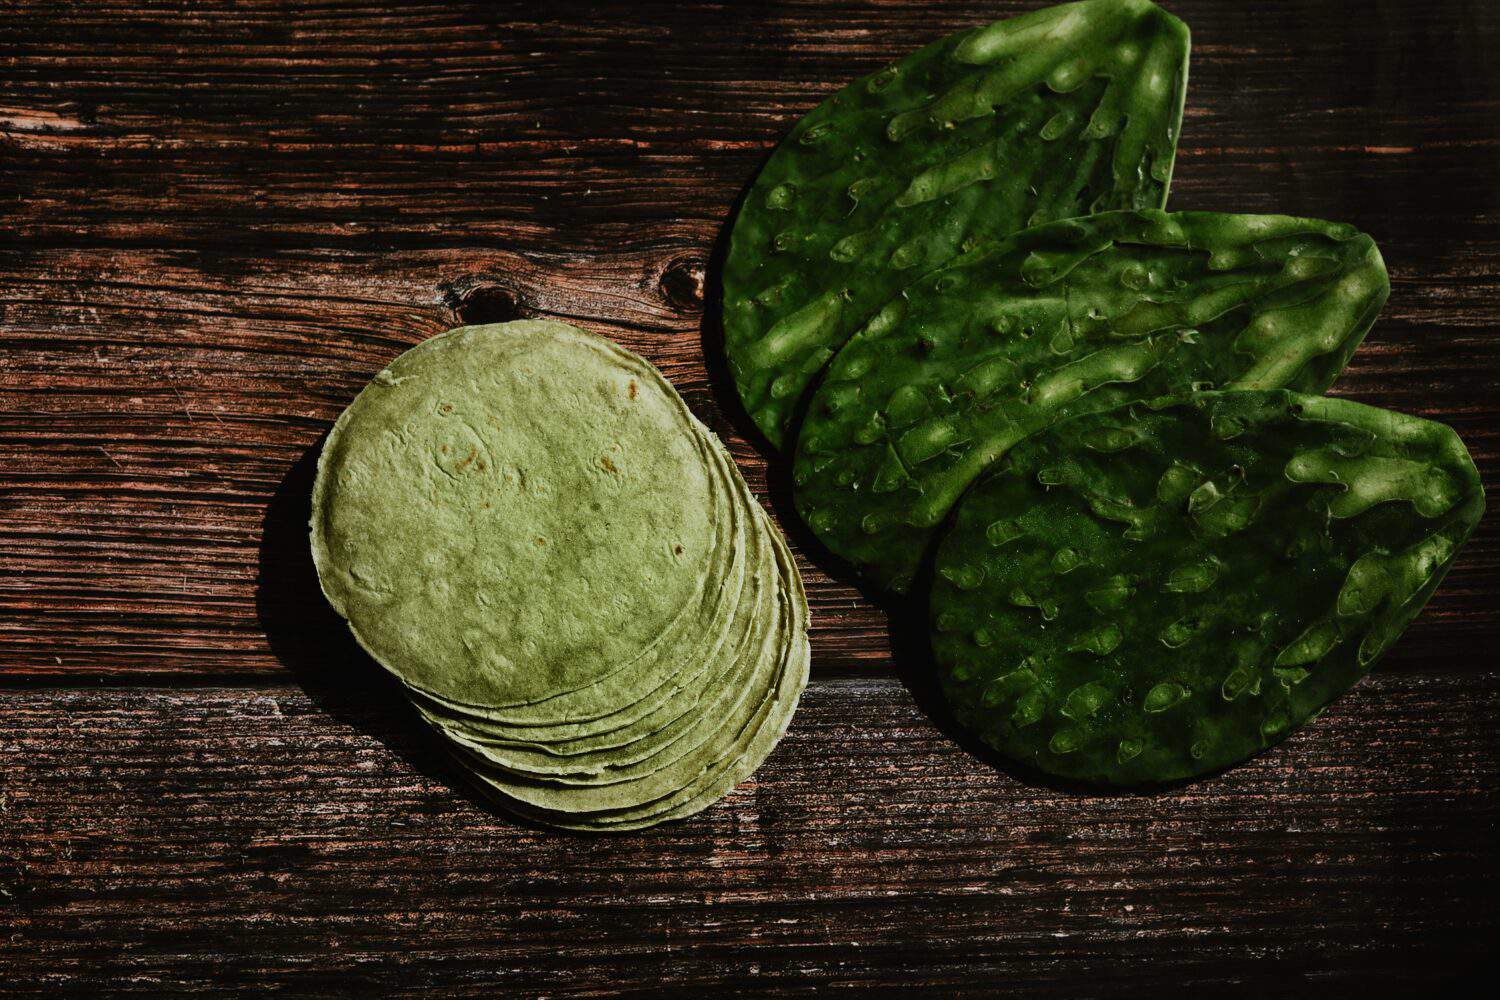 Mexican tortillas made with nopales in color green healthy vegan and organic food in Mexico